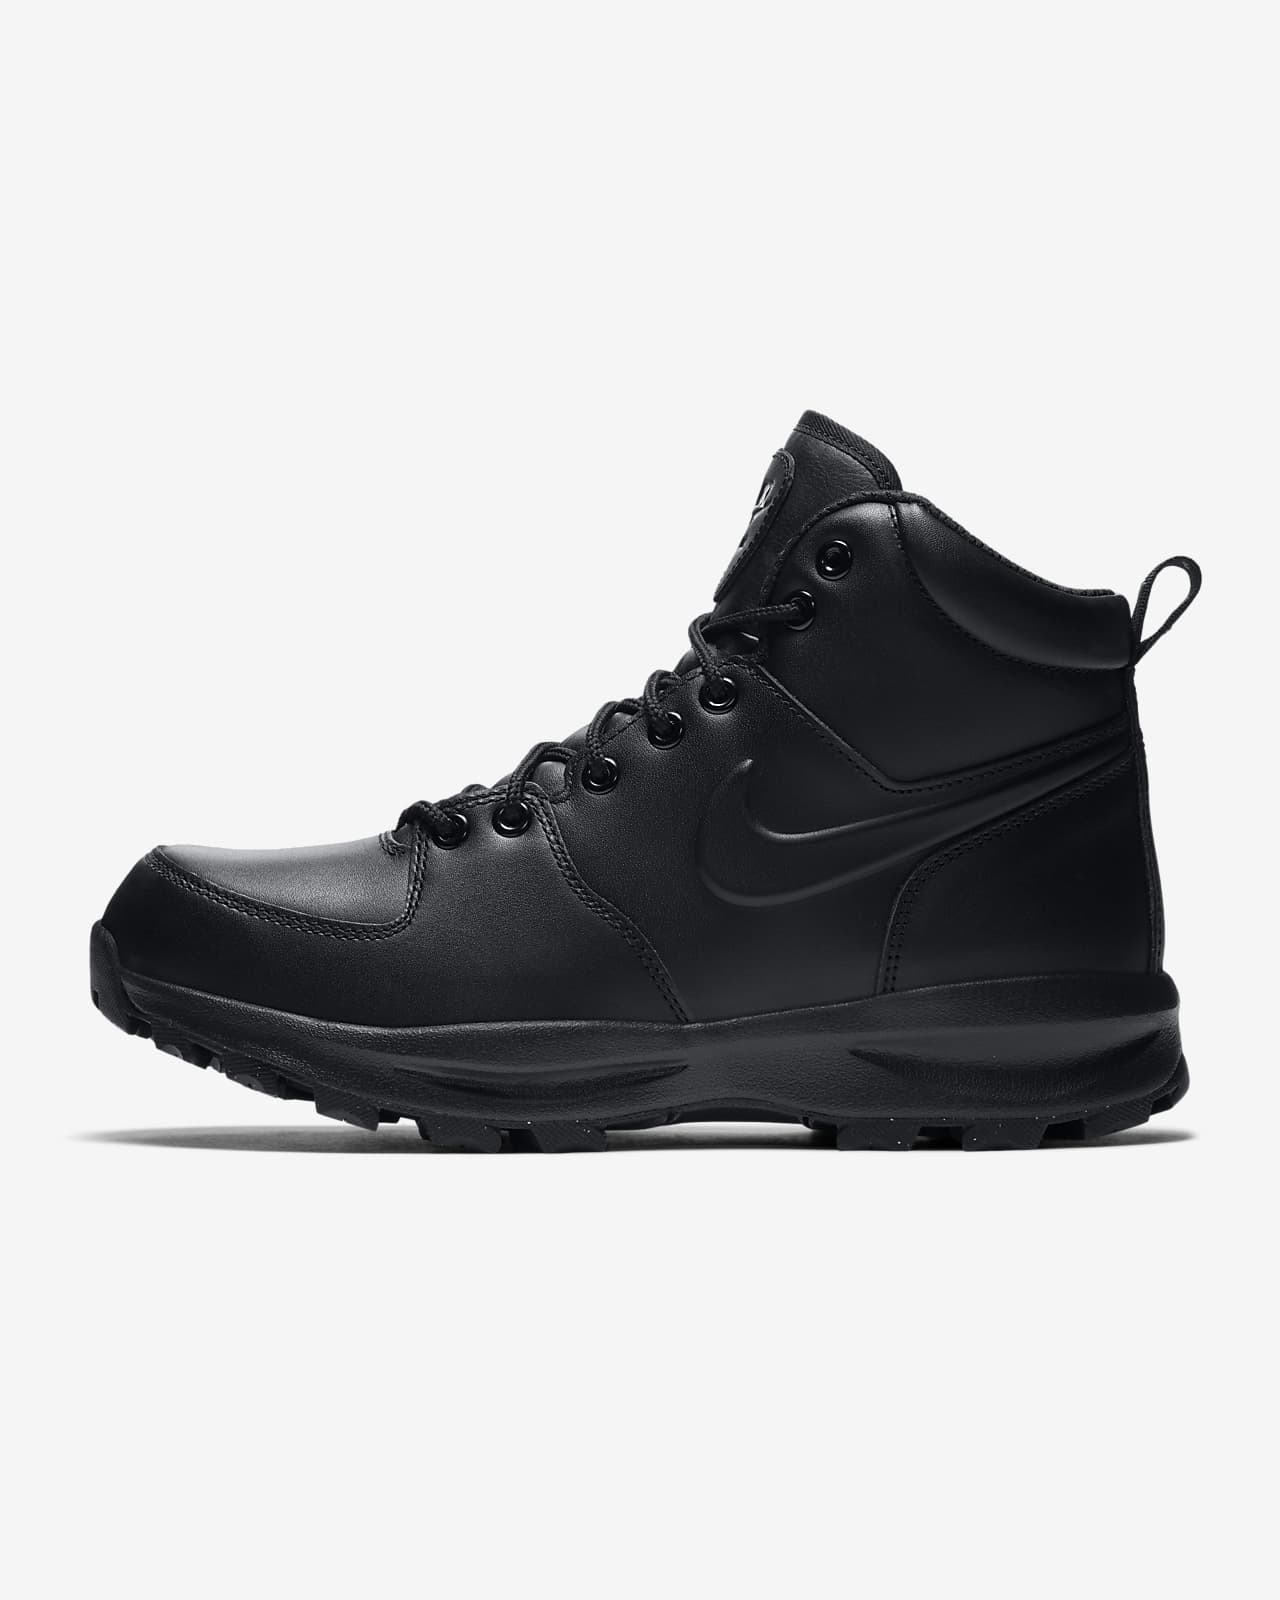 Nike Manoa Leather Herenboots